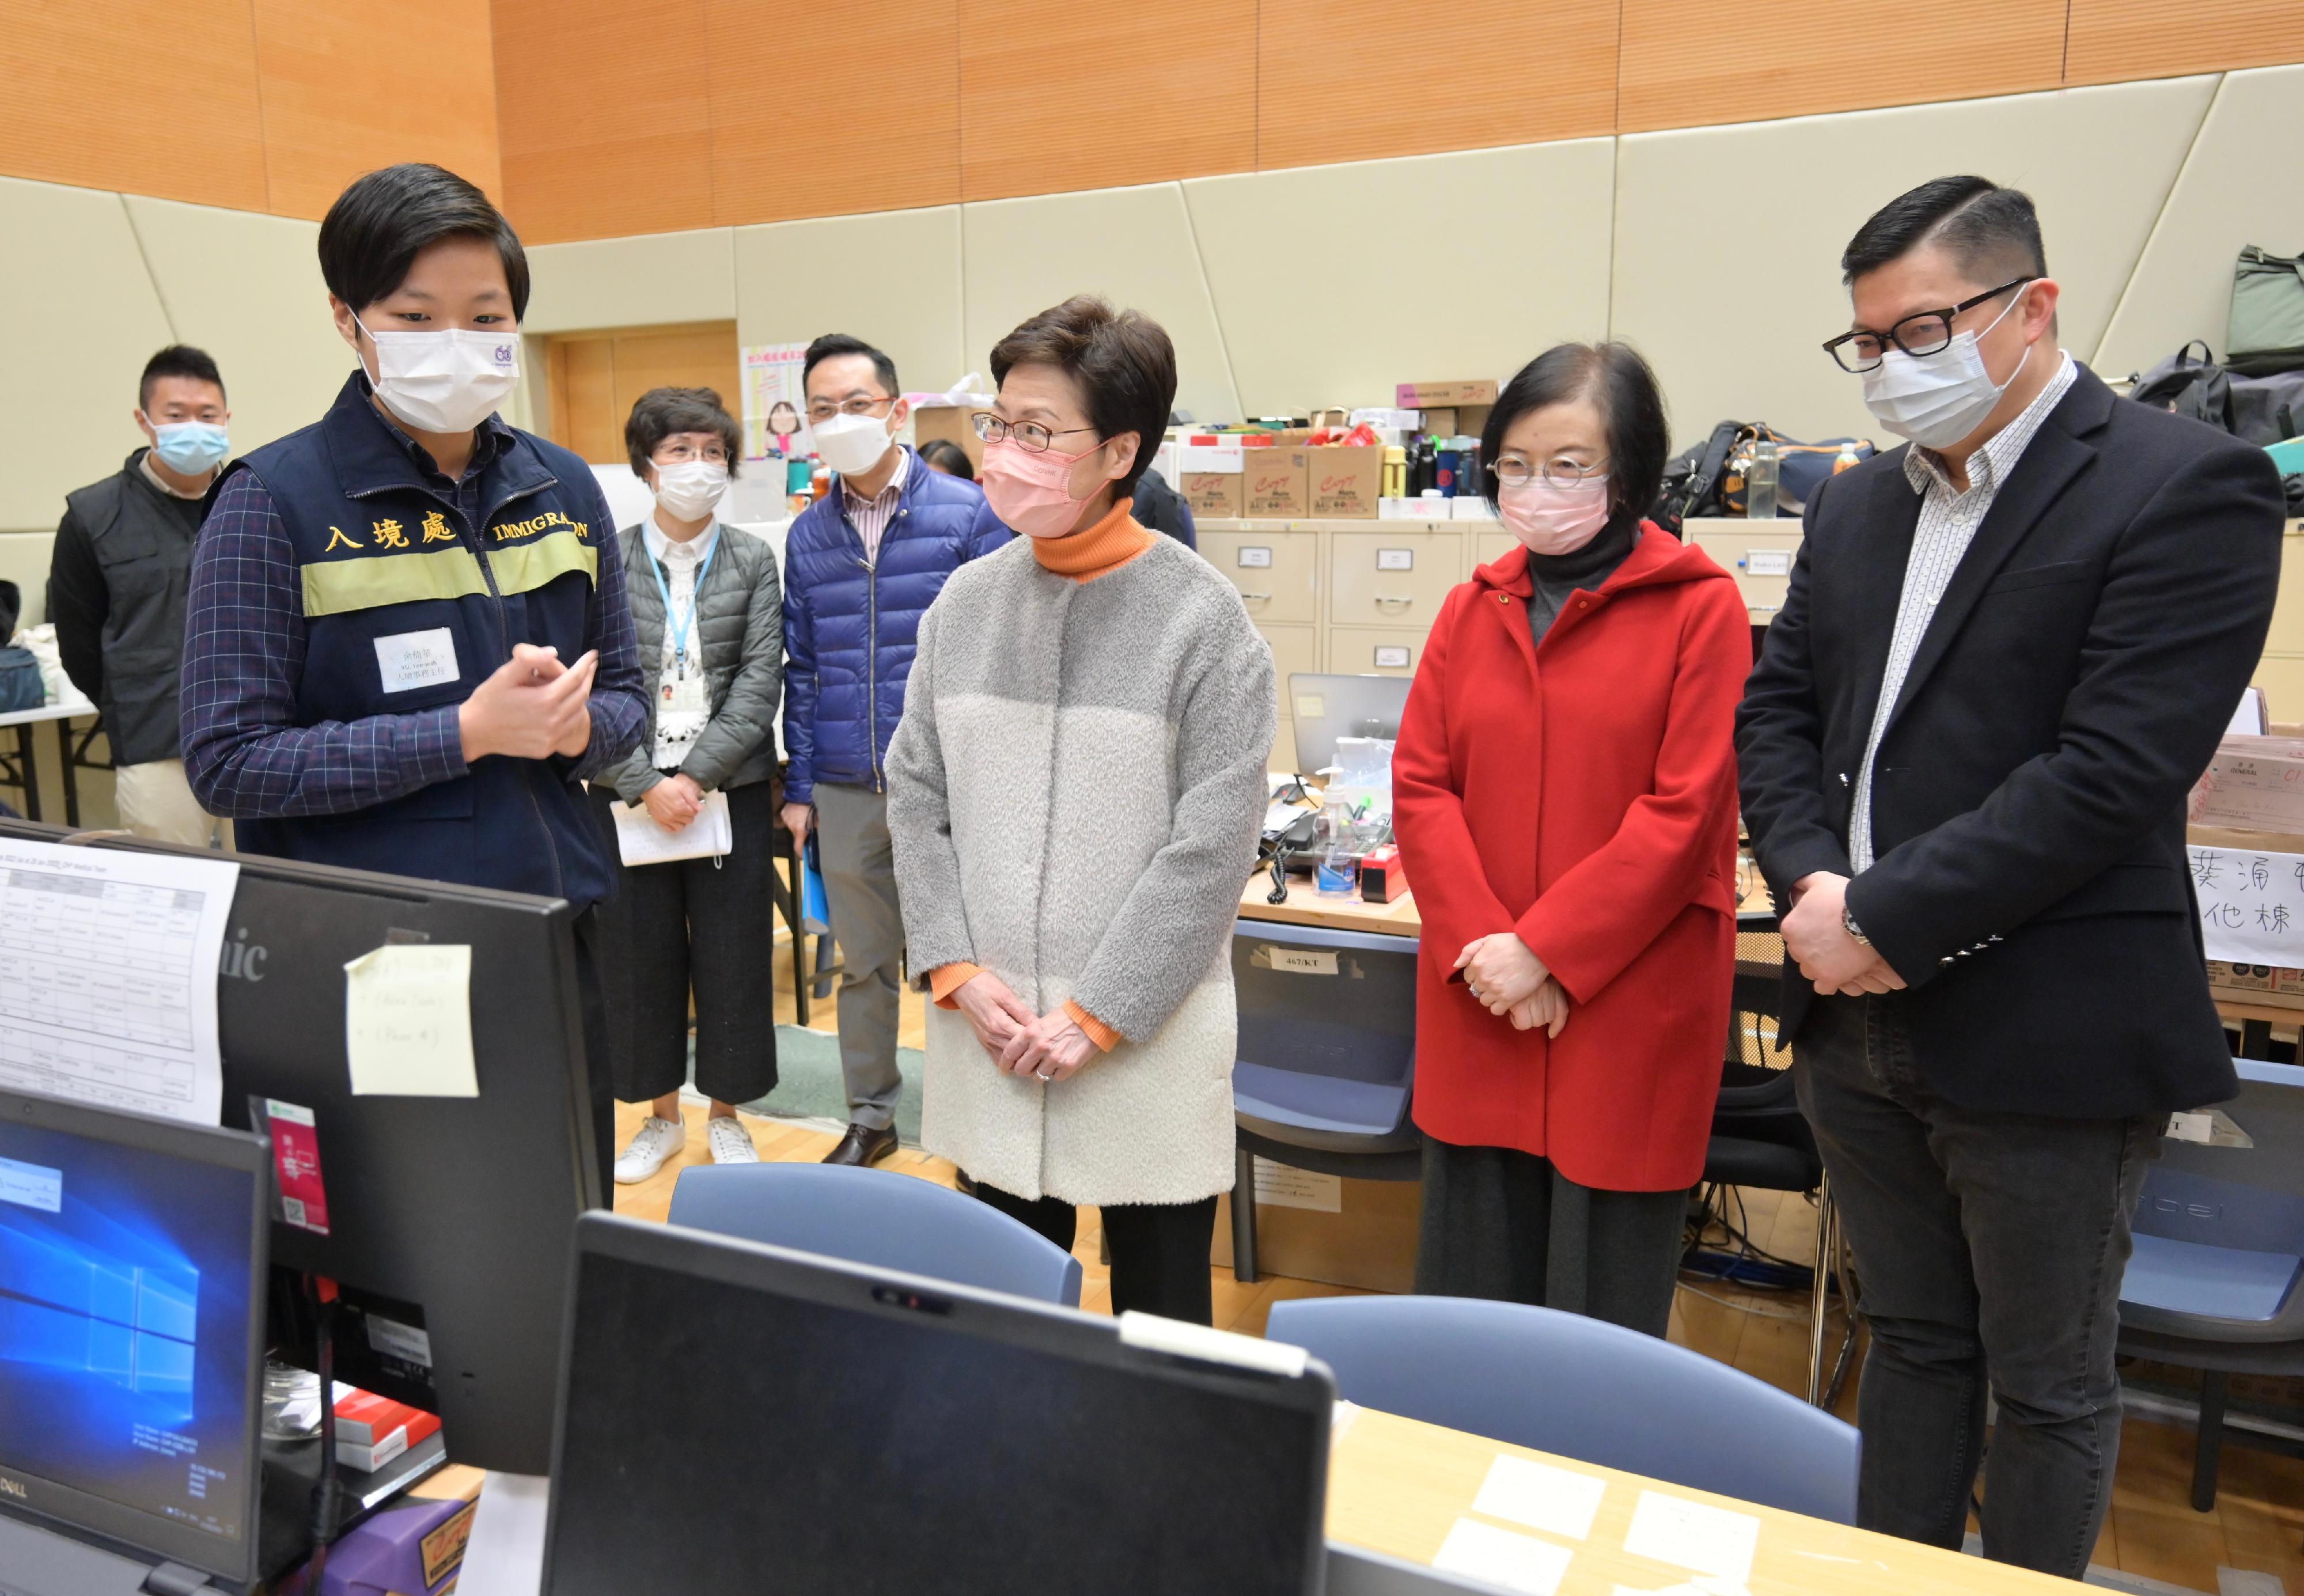 The Chief Executive, Mrs Carrie Lam, visited the Contact Tracing Offices in Kai Tak and Mong Kok today (February 1). Photo shows Mrs Lam (third right) being briefed by an immigration officer on the work of the Contact Tracing Office in Kai Tak. Looking on are the Secretary for Food and Health, Professor Sophia Chan (second right), and the Secretary for Security, Mr Tang Ping-keung (first right).